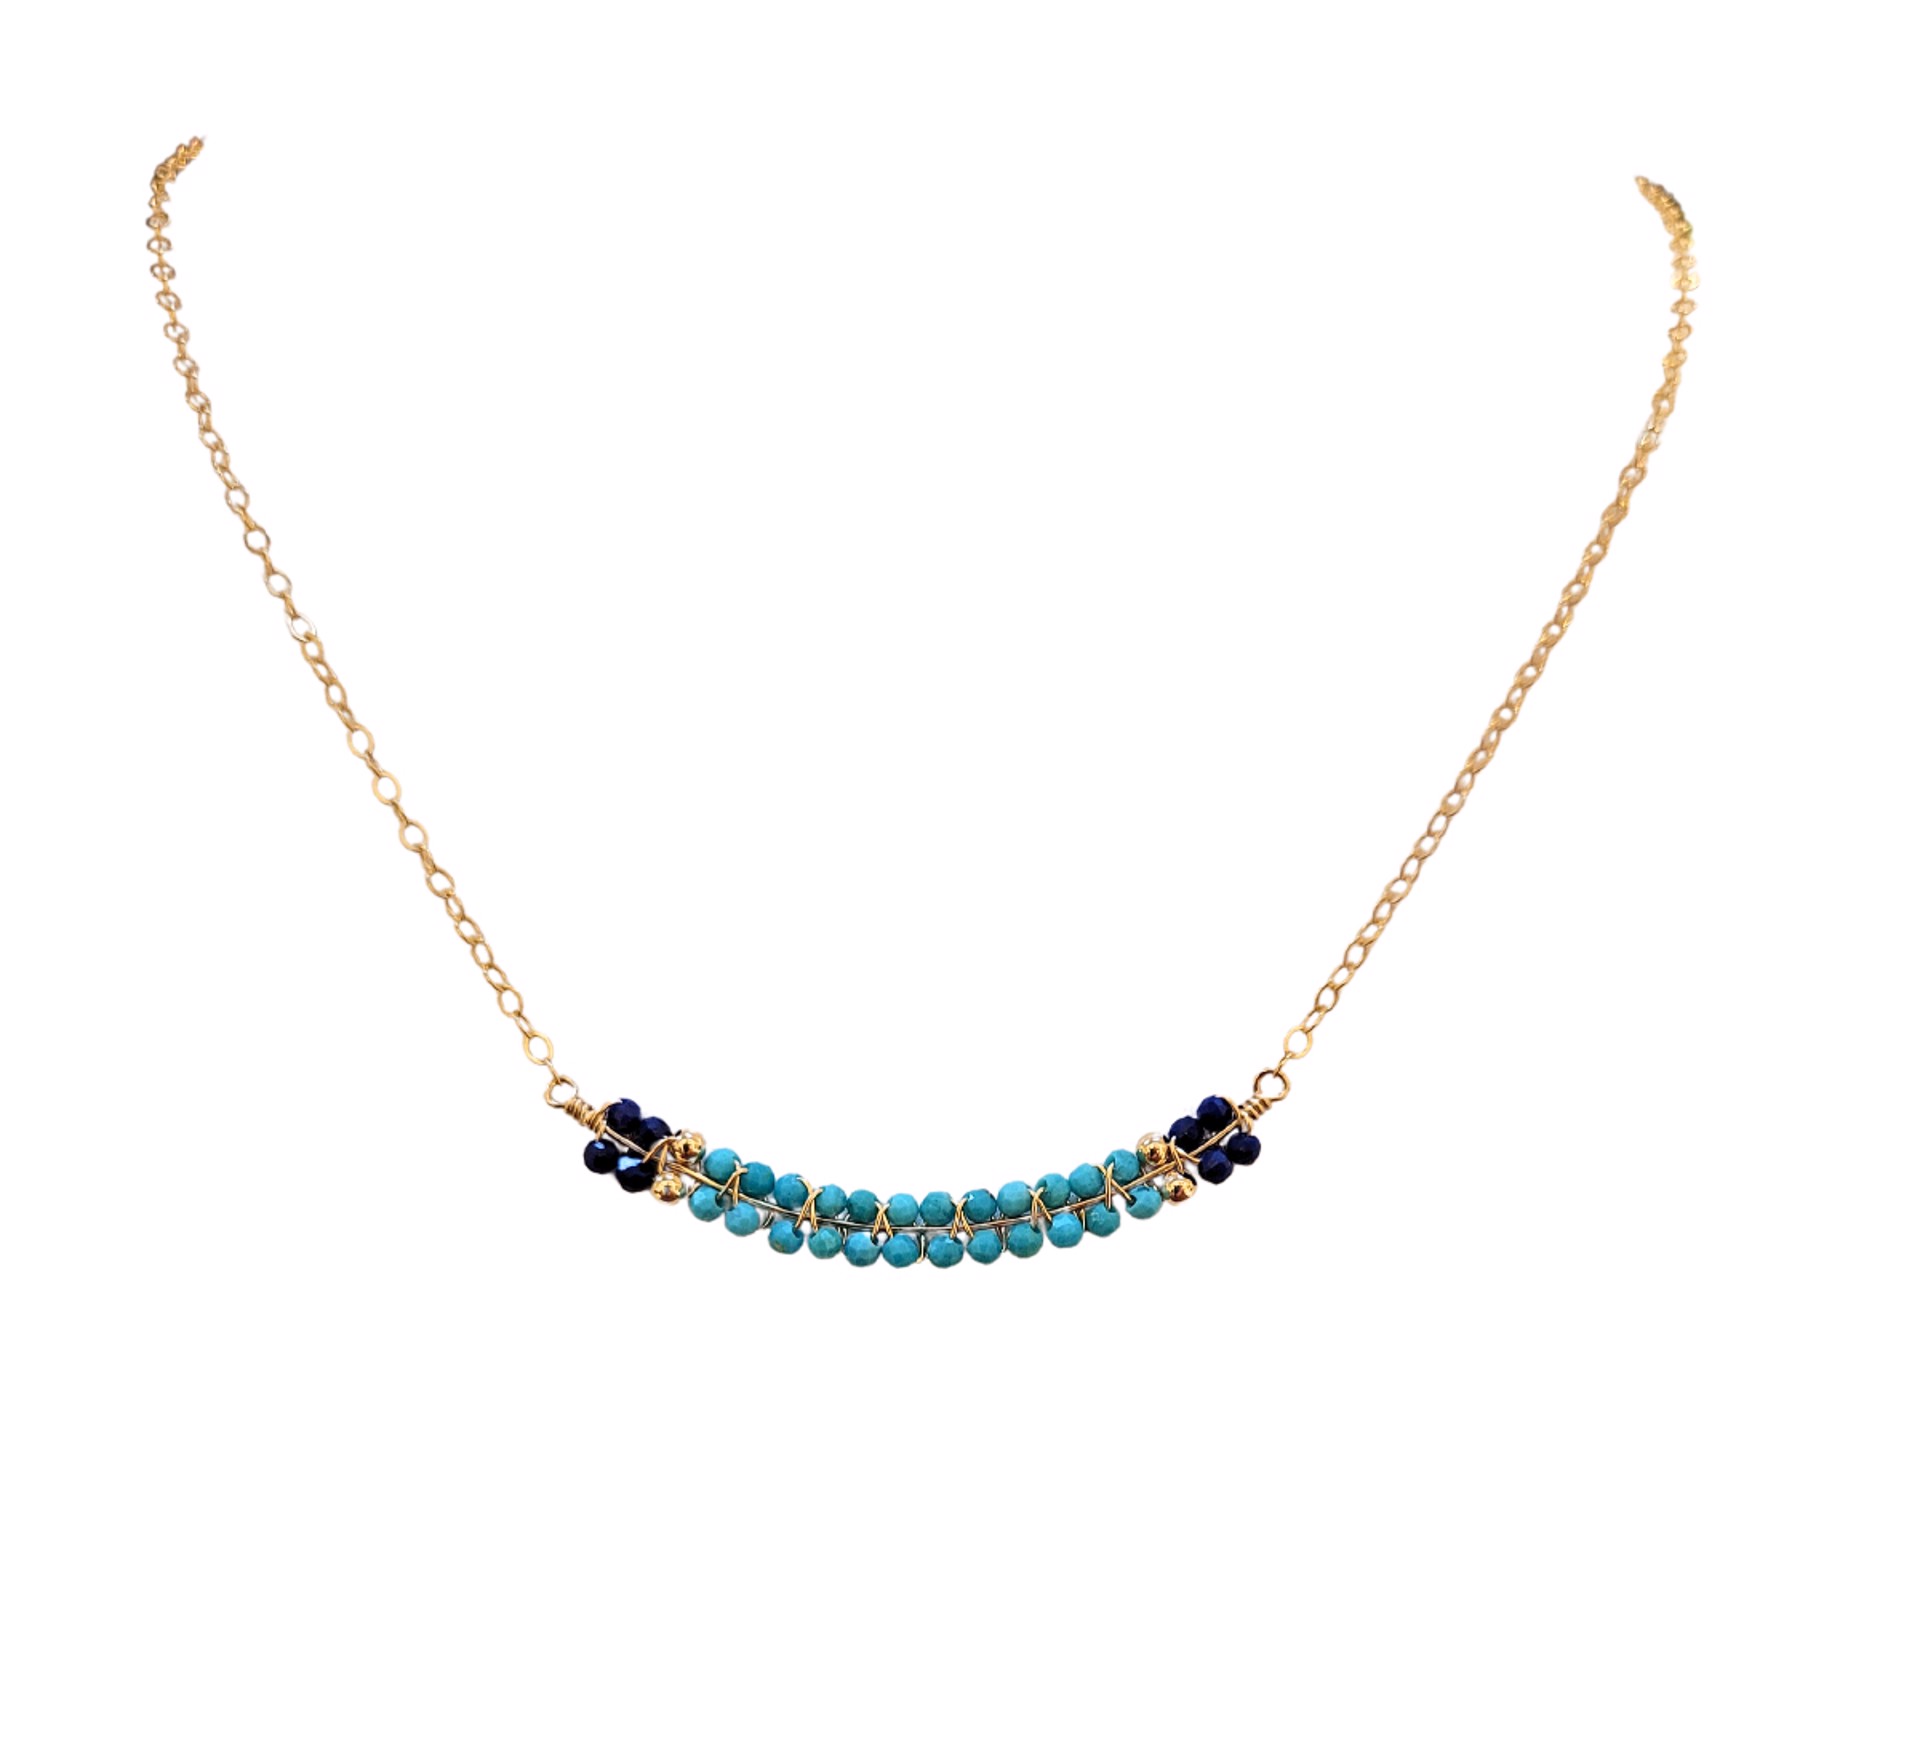 Necklace - Sleeping Beauty Turquoise and Lapis Bar by Julia Balestracci